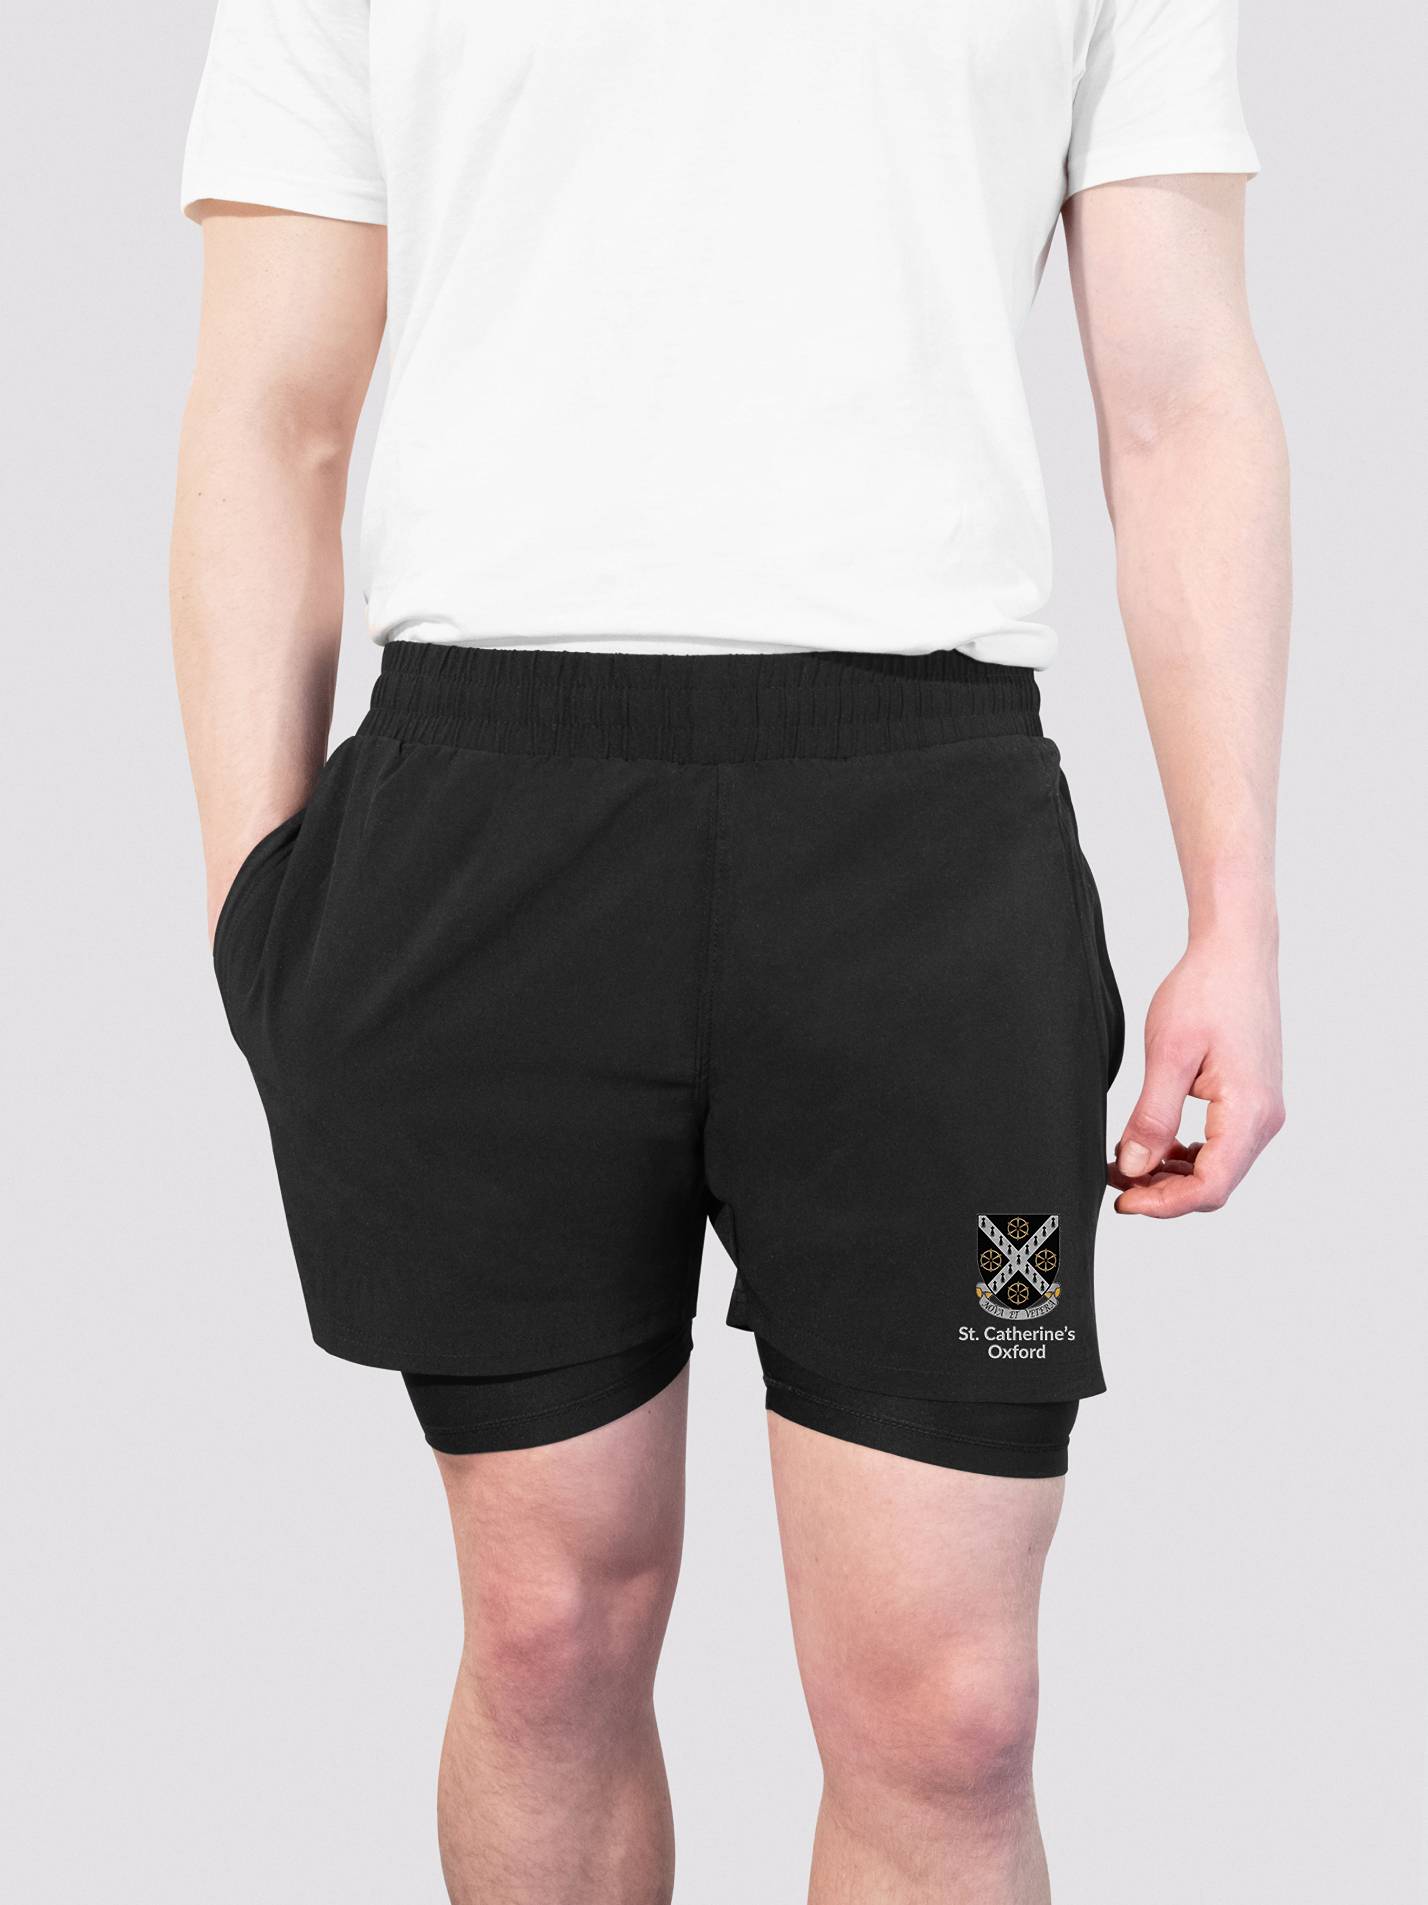 St Catherine's College Oxford MCR Dual Layer Sports Shorts